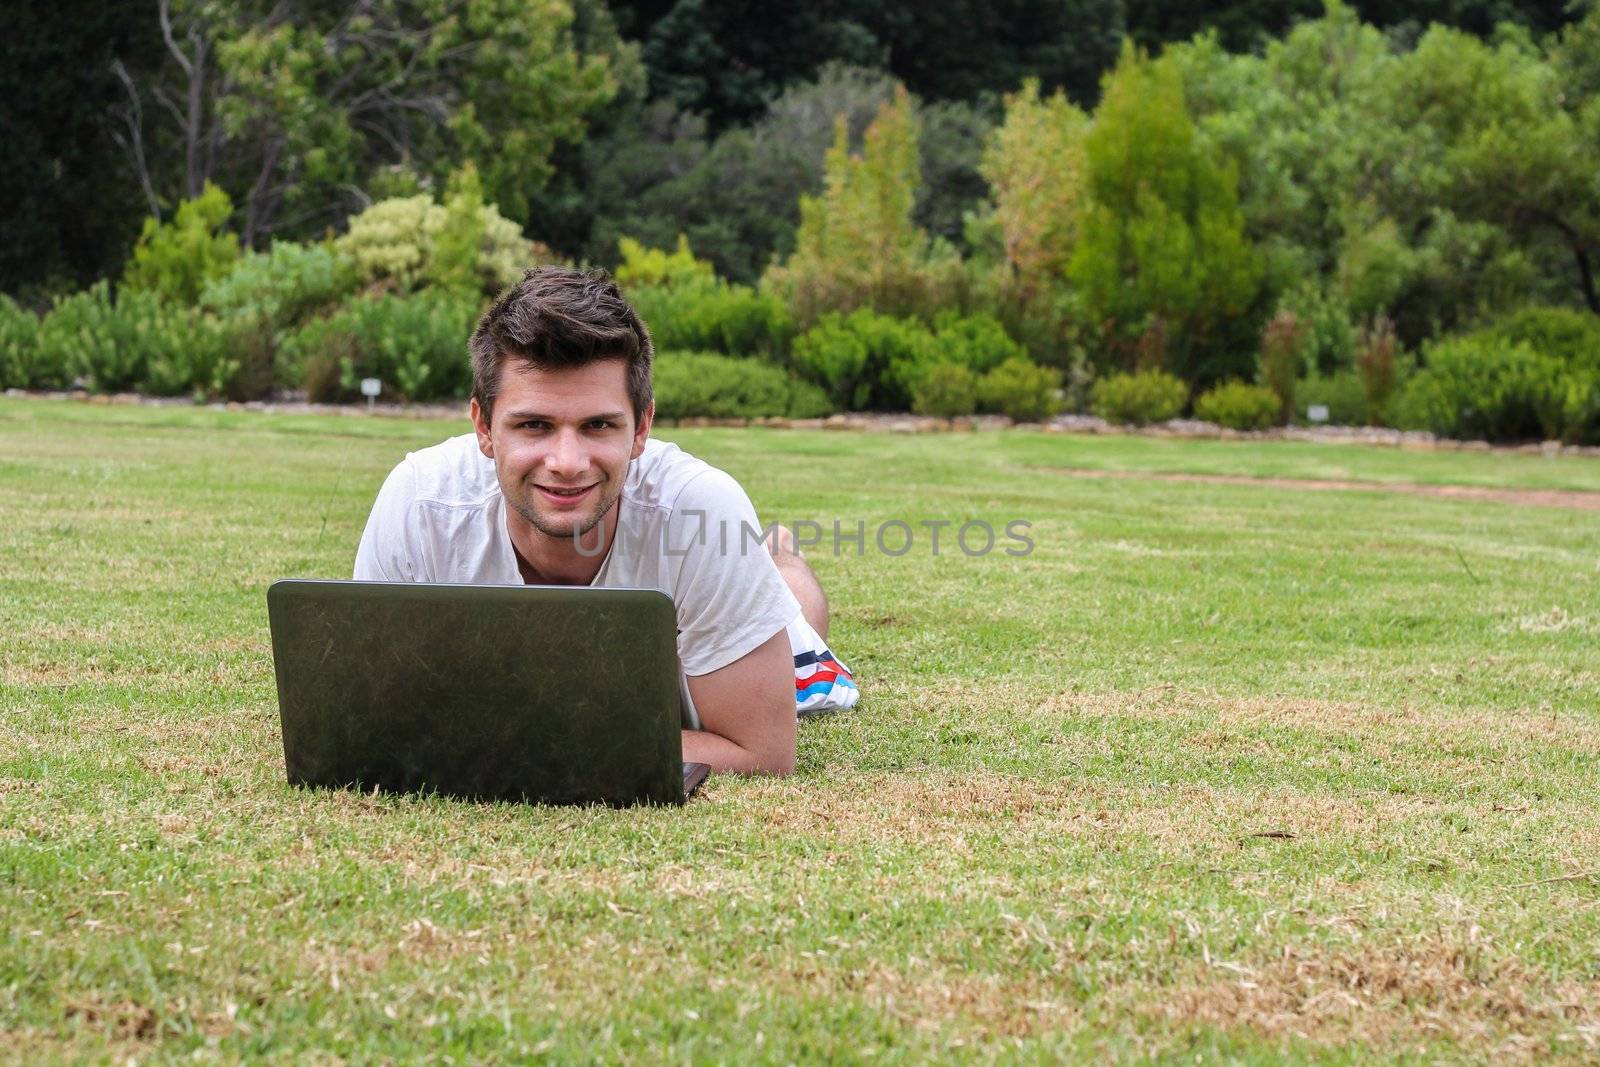 Man working on Notebook outdoors in park